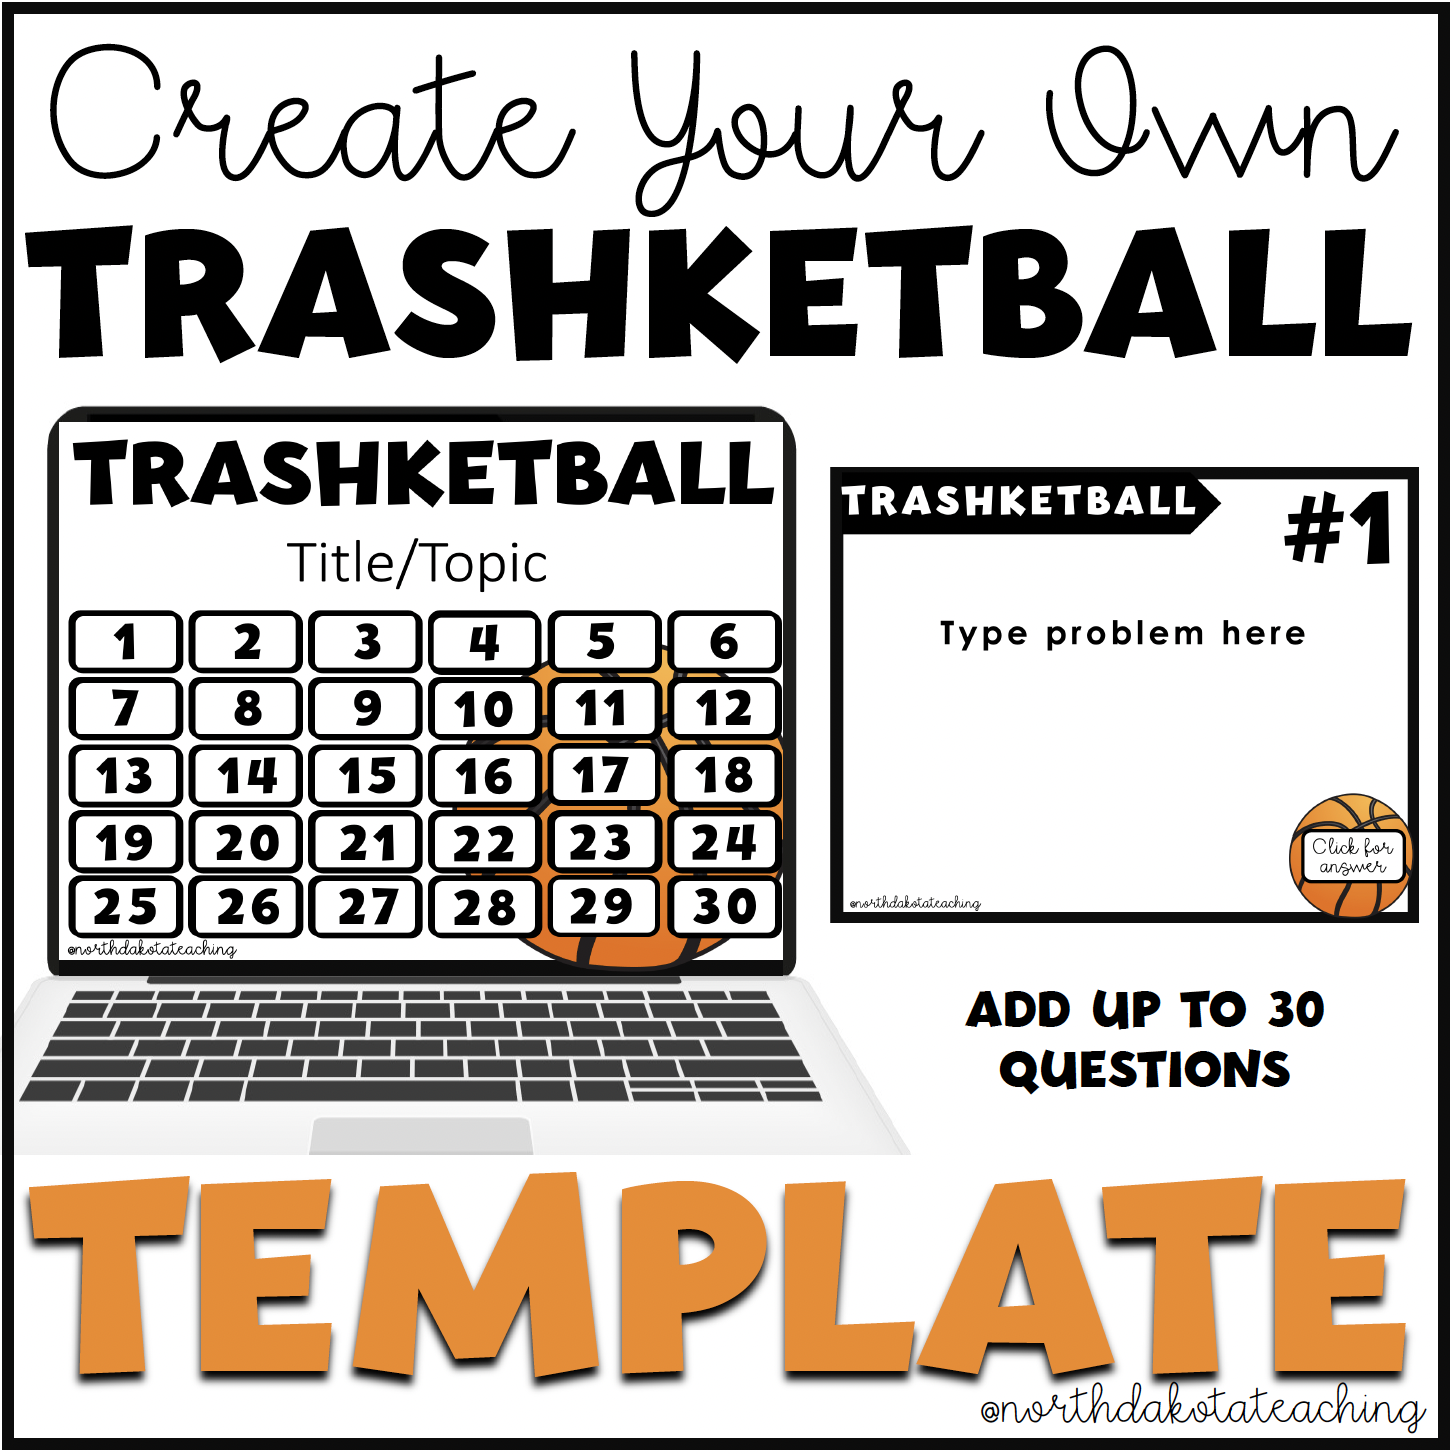 create-your-own-trashketball.png